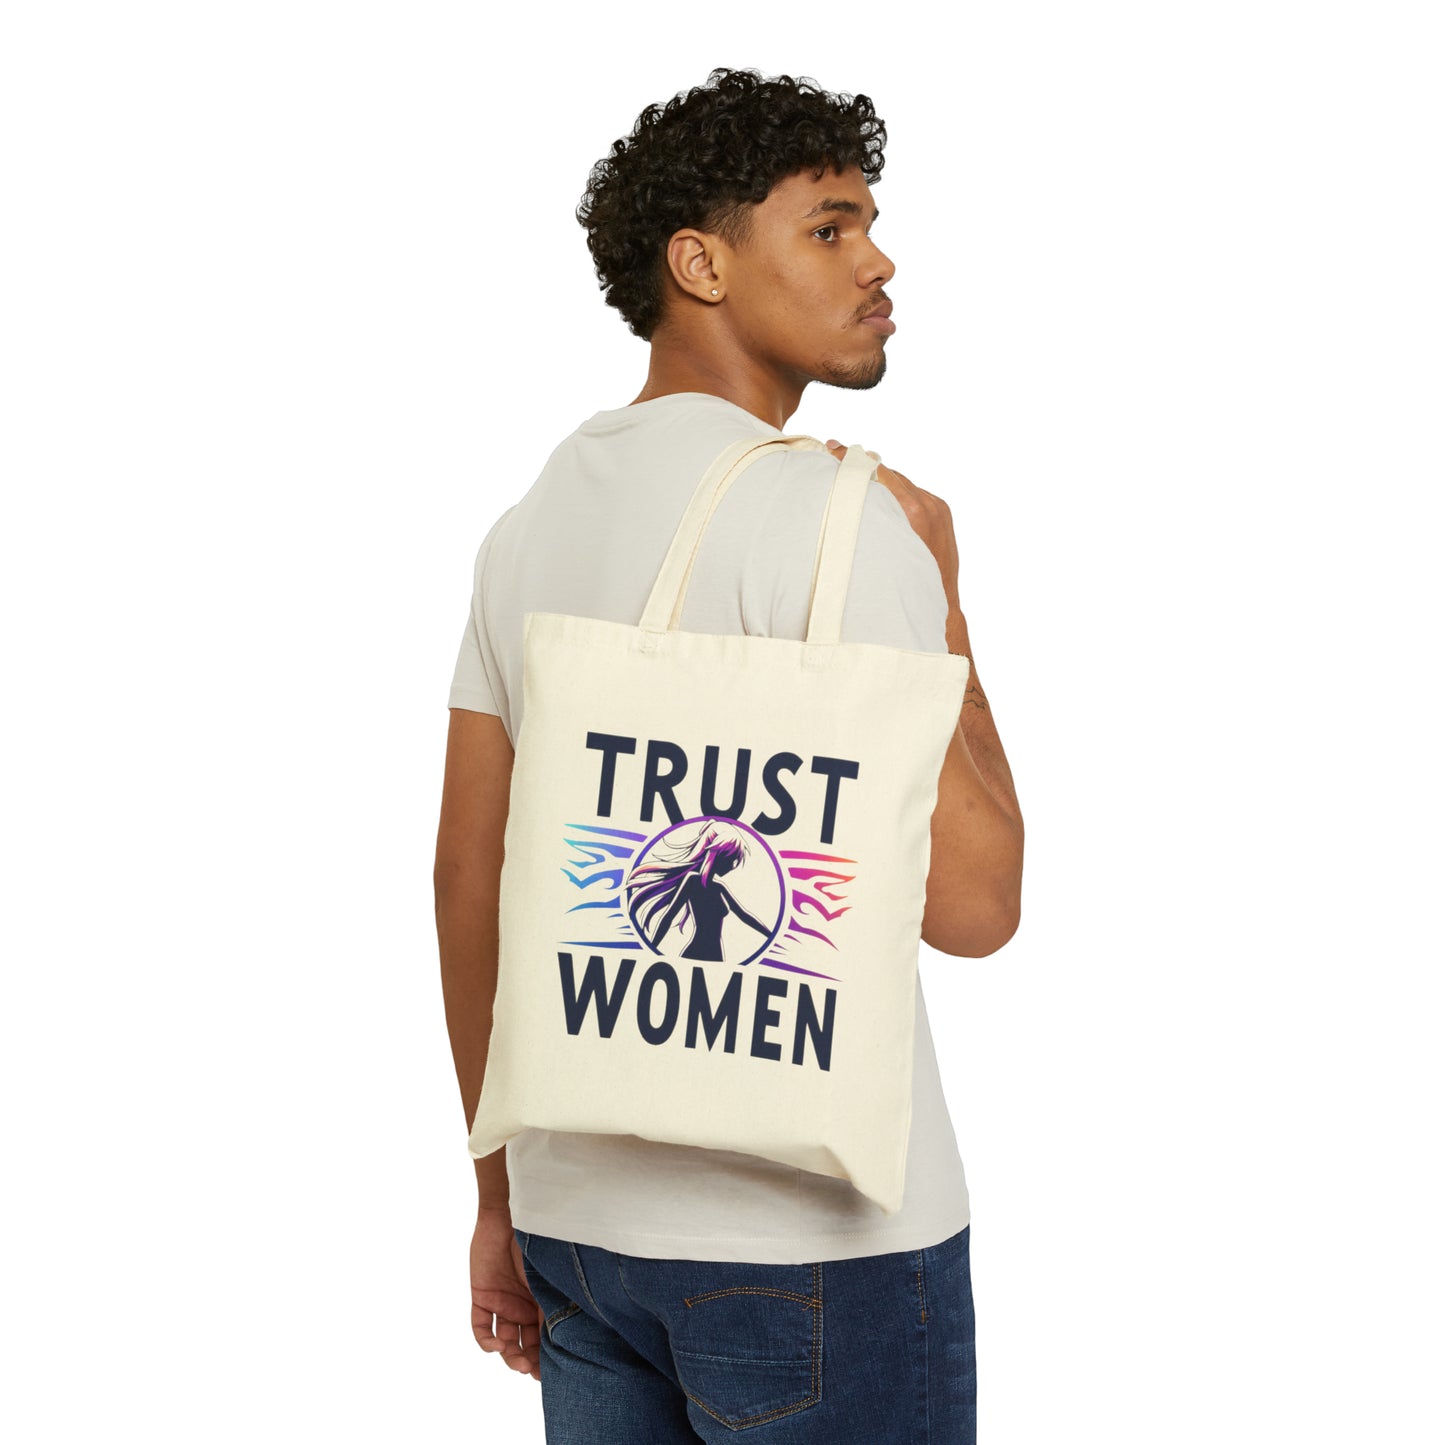 Bold Inspirational Statement Canvas Tote Bag: Trust Women! Shouldn't Need to be Said...